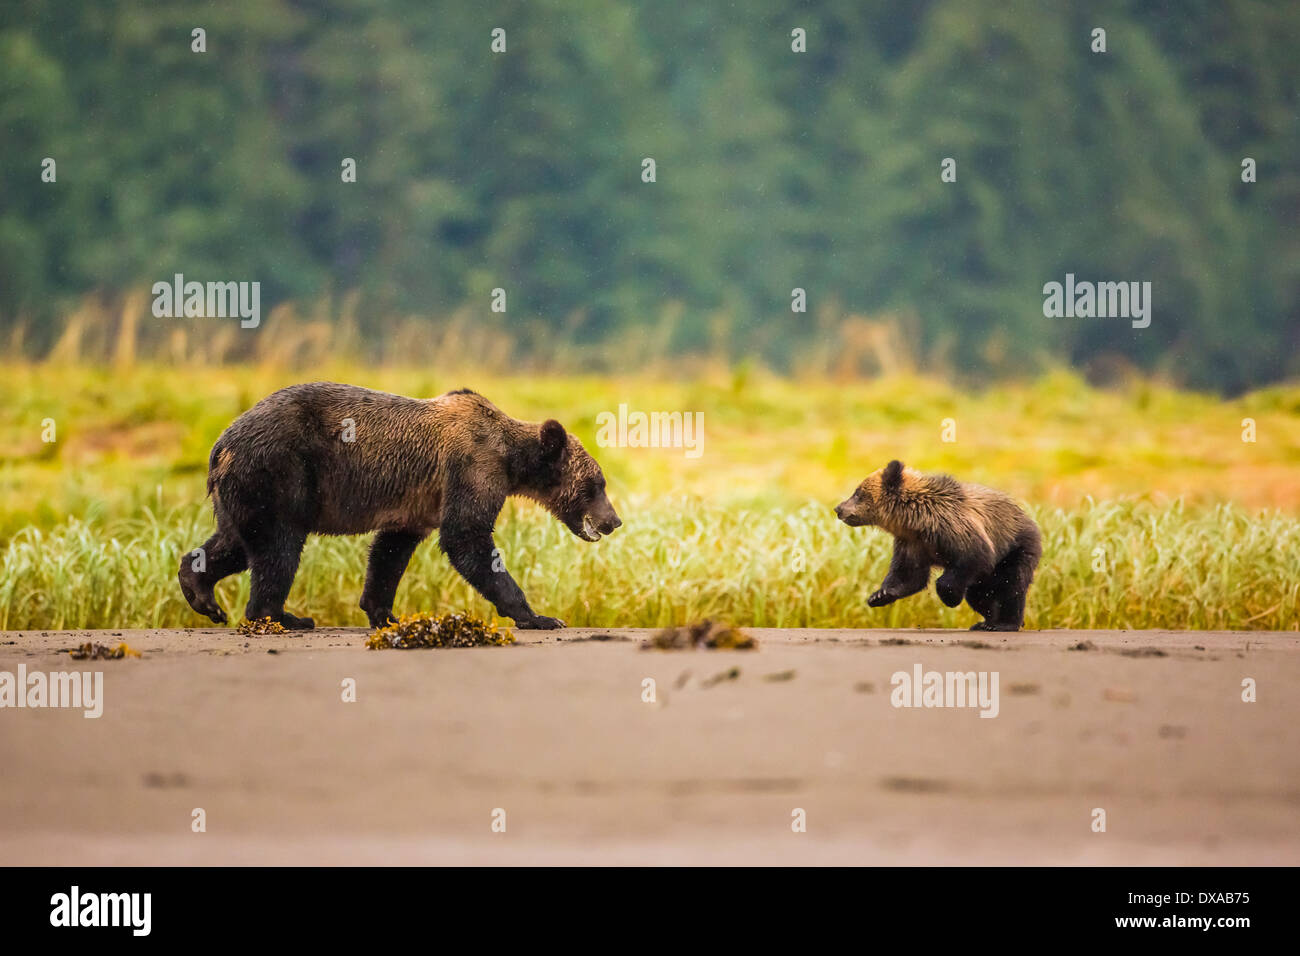 A Grizzly Bear sow play fights with her first year cub on the beach created at low tide in the Khutzeymateen Inlet in BC. Stock Photo